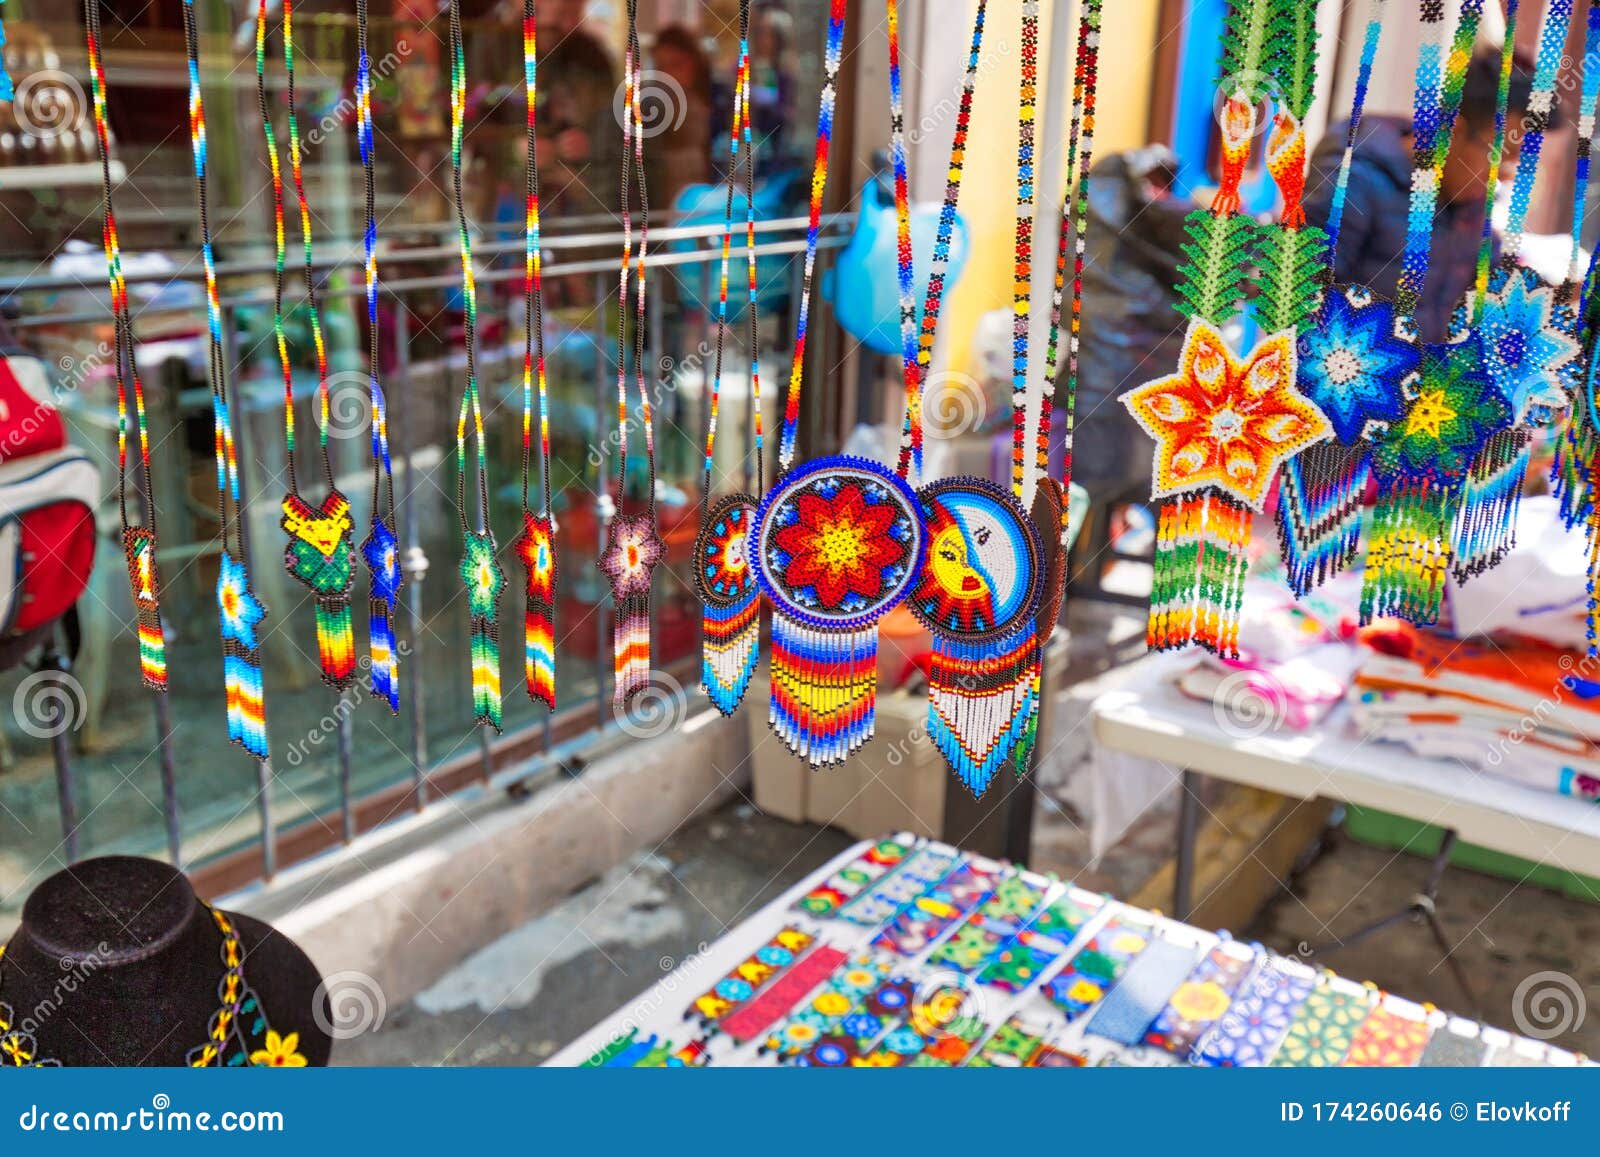 market stands on the streets of historic city center barrio antiguo in monterrey displaying authentic artisan work